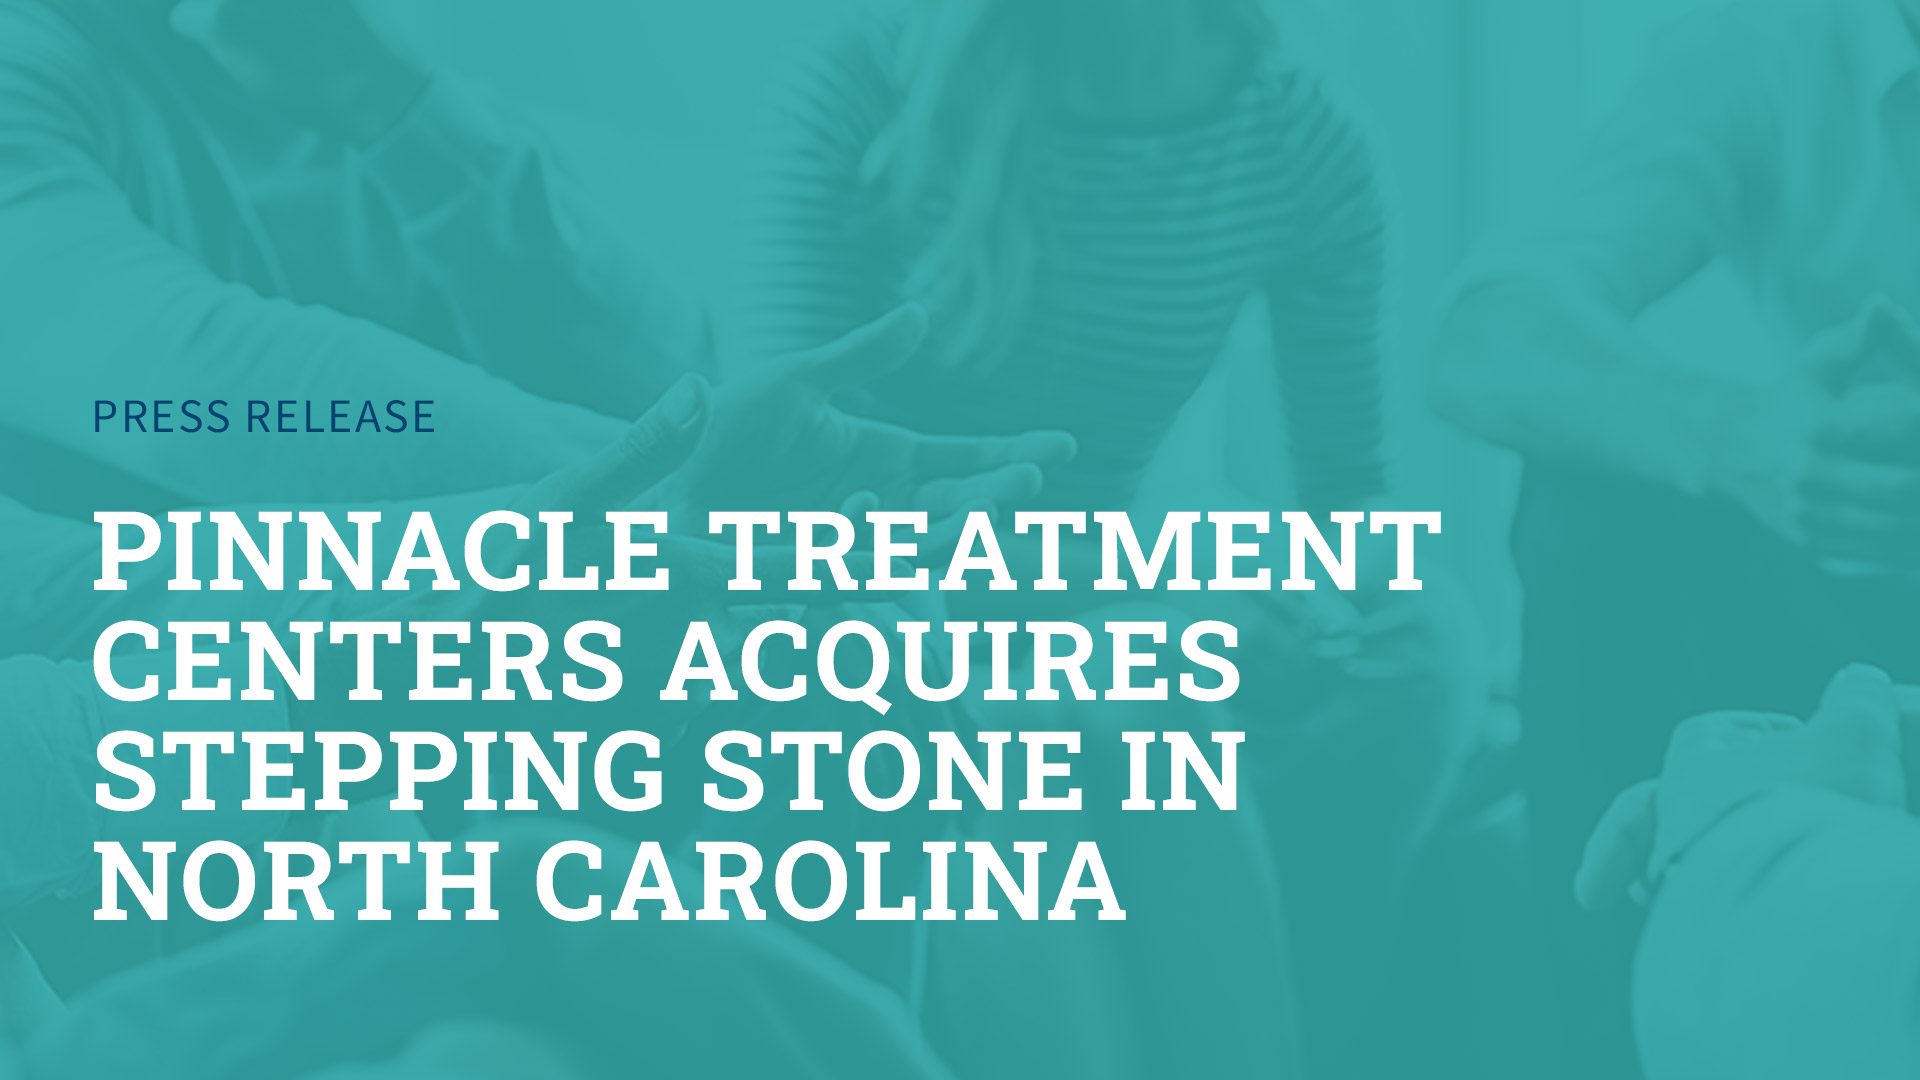 Pinnacle Treatment Centers Acquires Stepping Stone in North Carolina